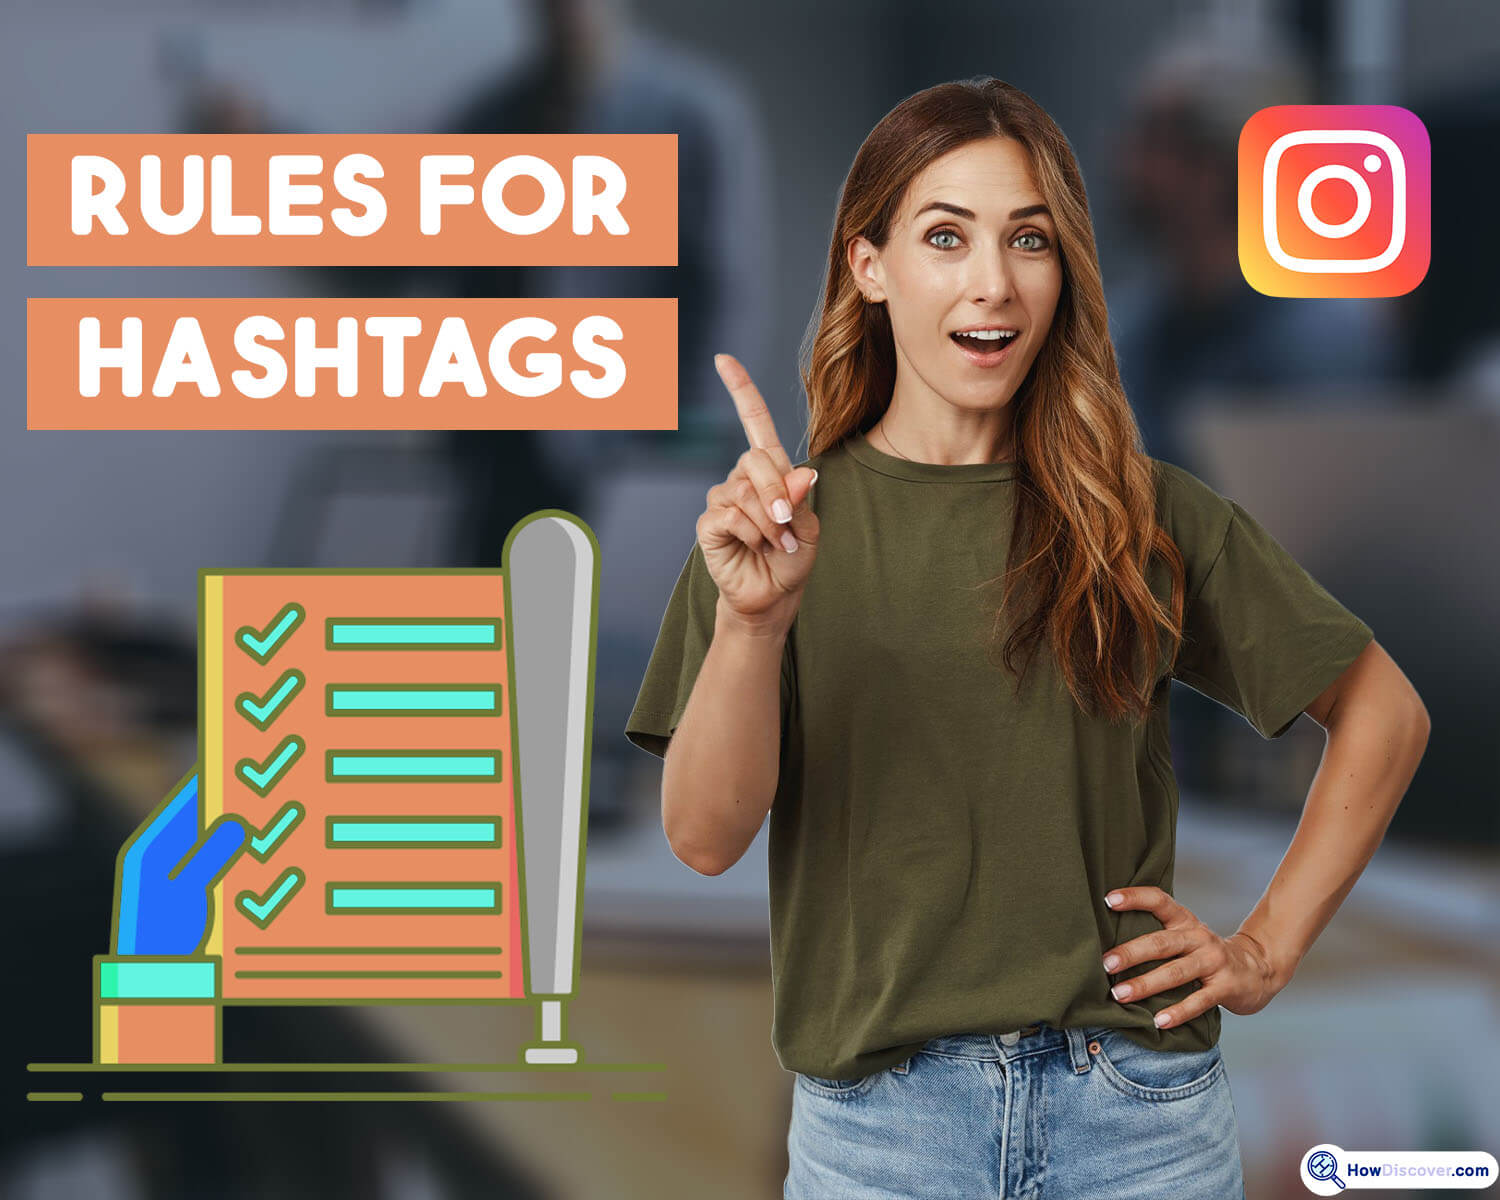 What are the rules for hashtags on Instagram - Hiding Hashtags On Instagram